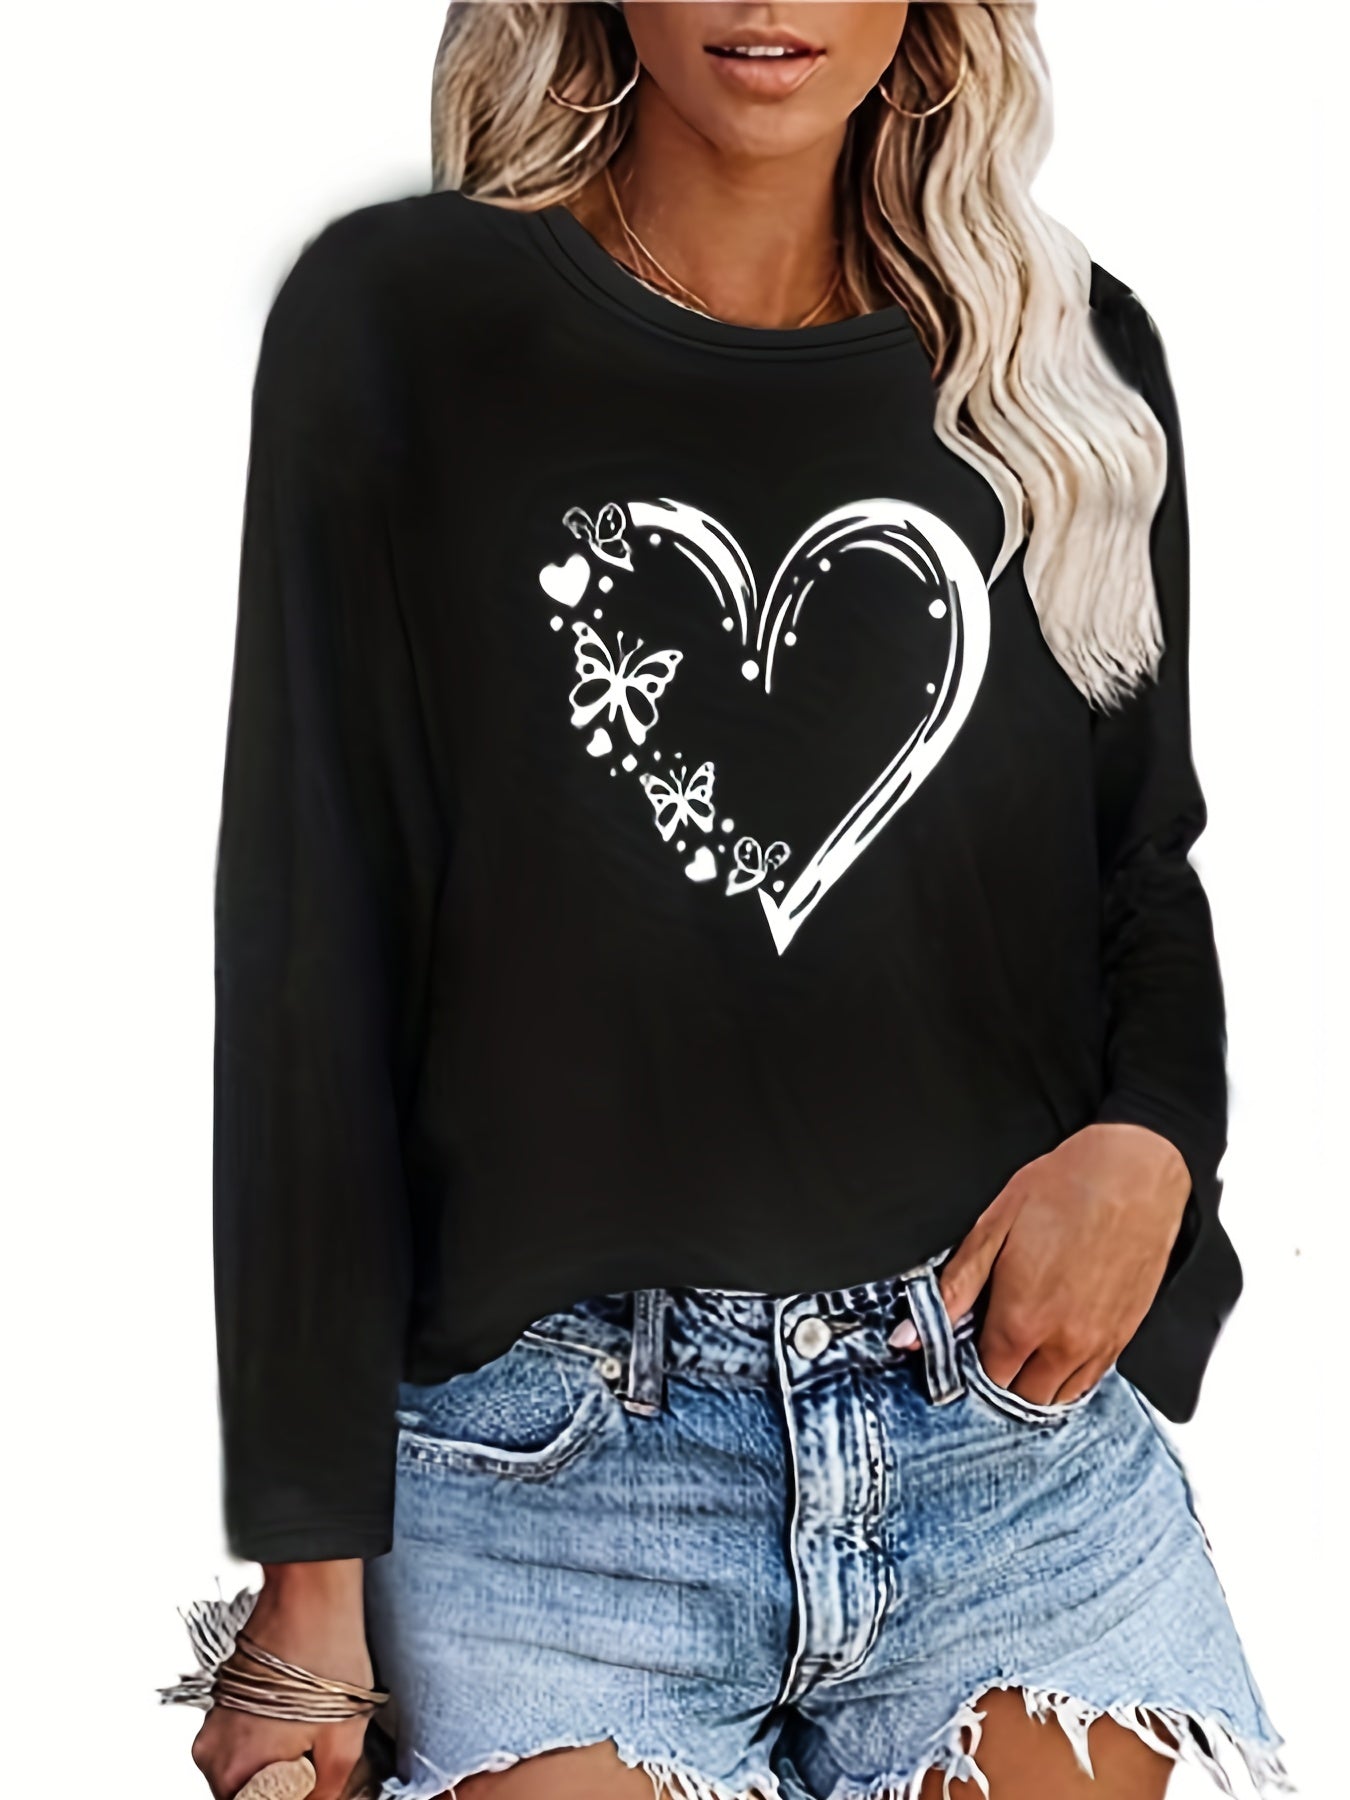 Heart & Butterfly Print Crew Neck T-Shirt, Casual Long Sleeve T-Shirt For Spring & Fall, Women's Clothing